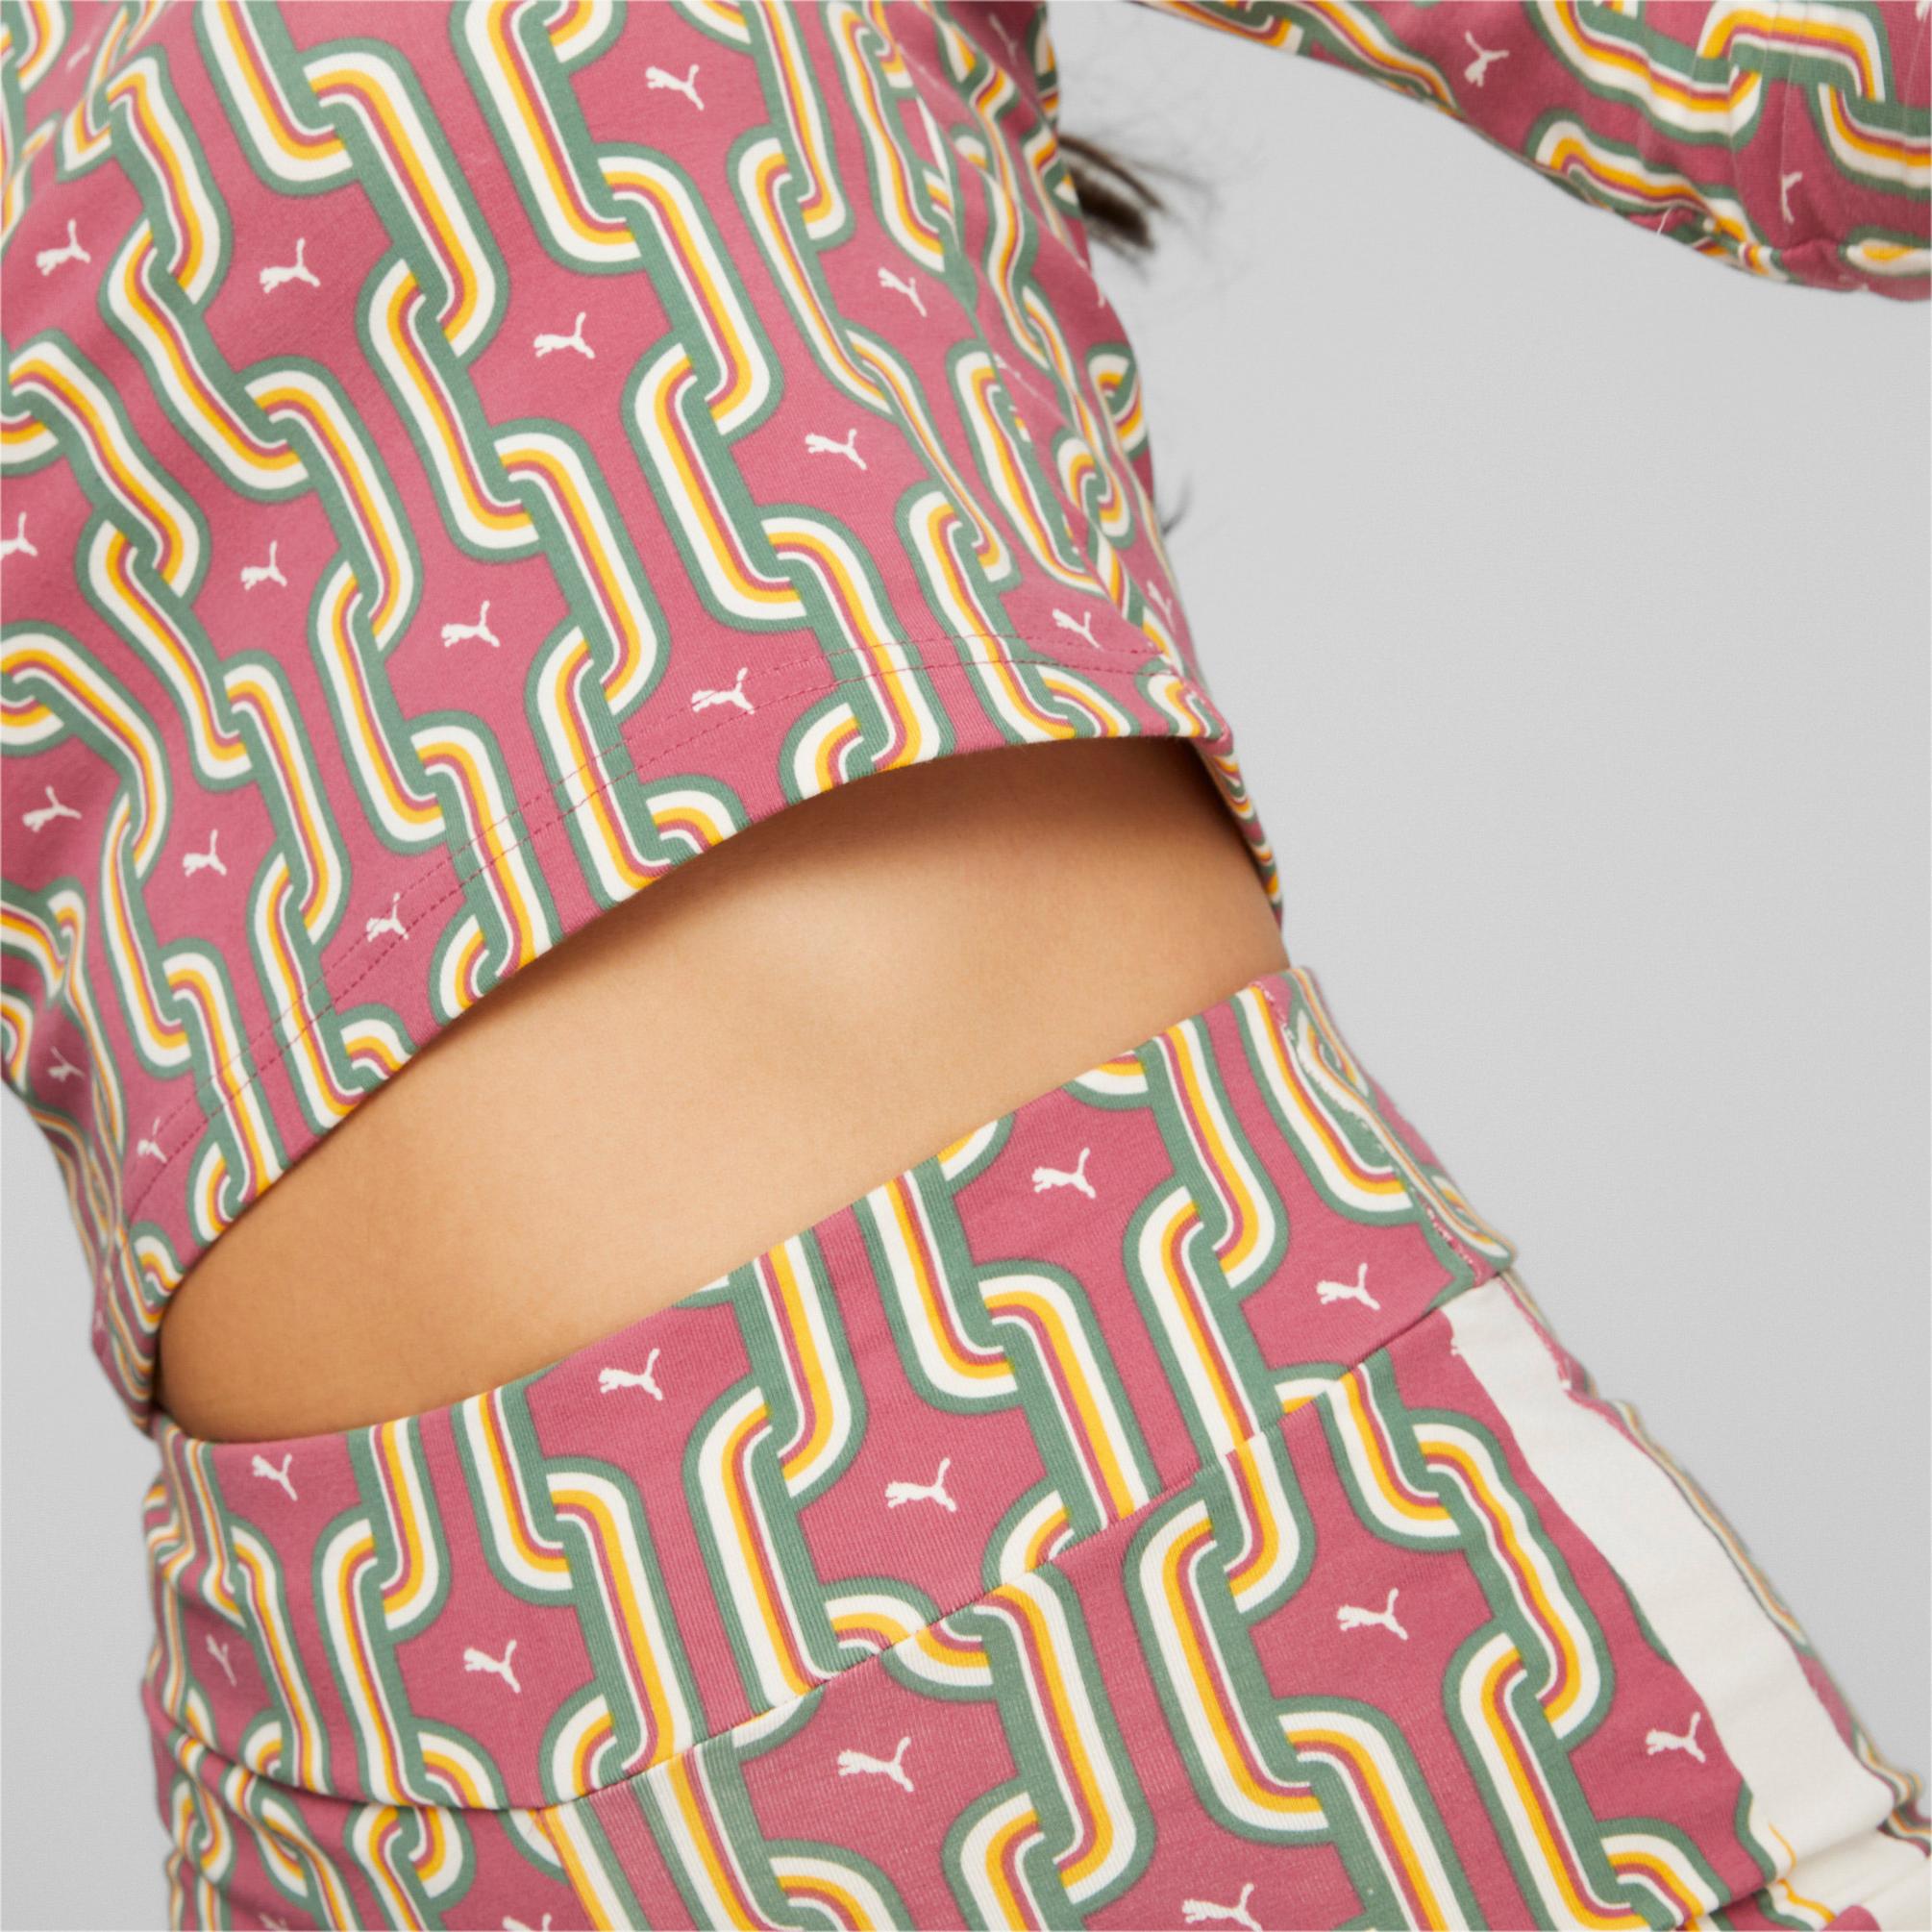  Puma T7 70S Psychedelic Graphic Ls Cropped Kadın Pembe Crop